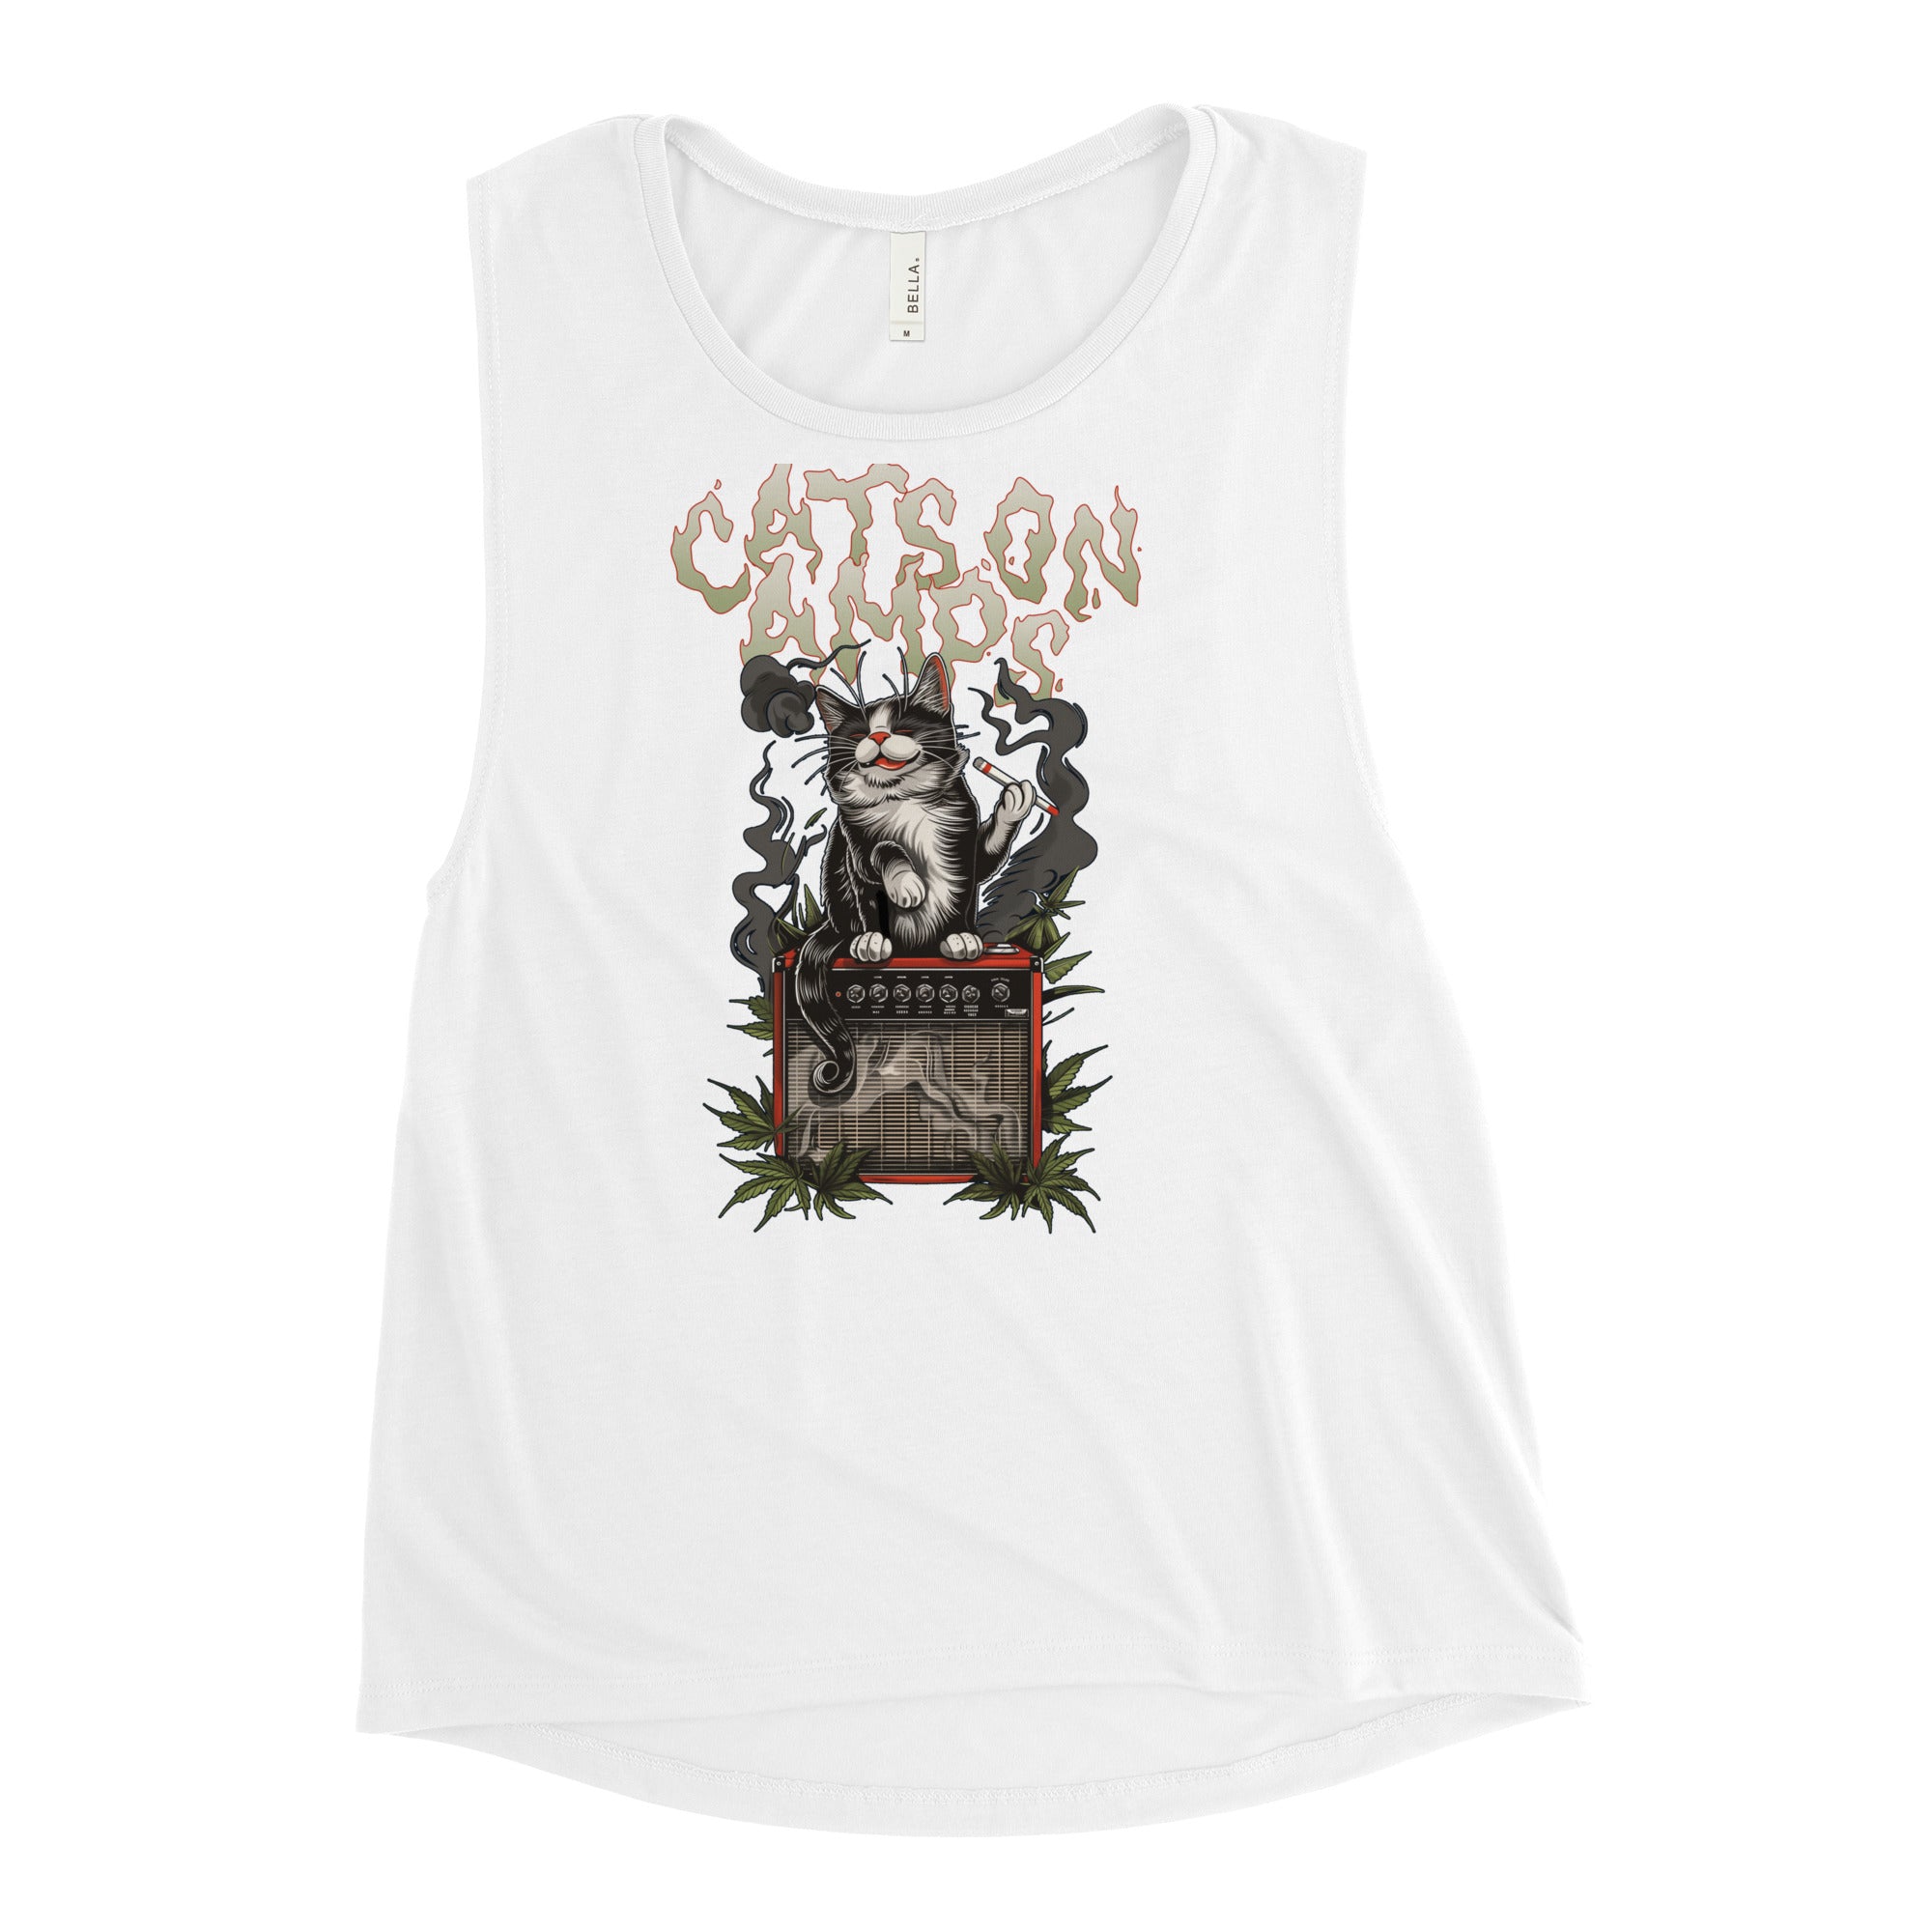 CATS ON AMPS - 420 relishing Cat - Ladies’ Muscle Tank